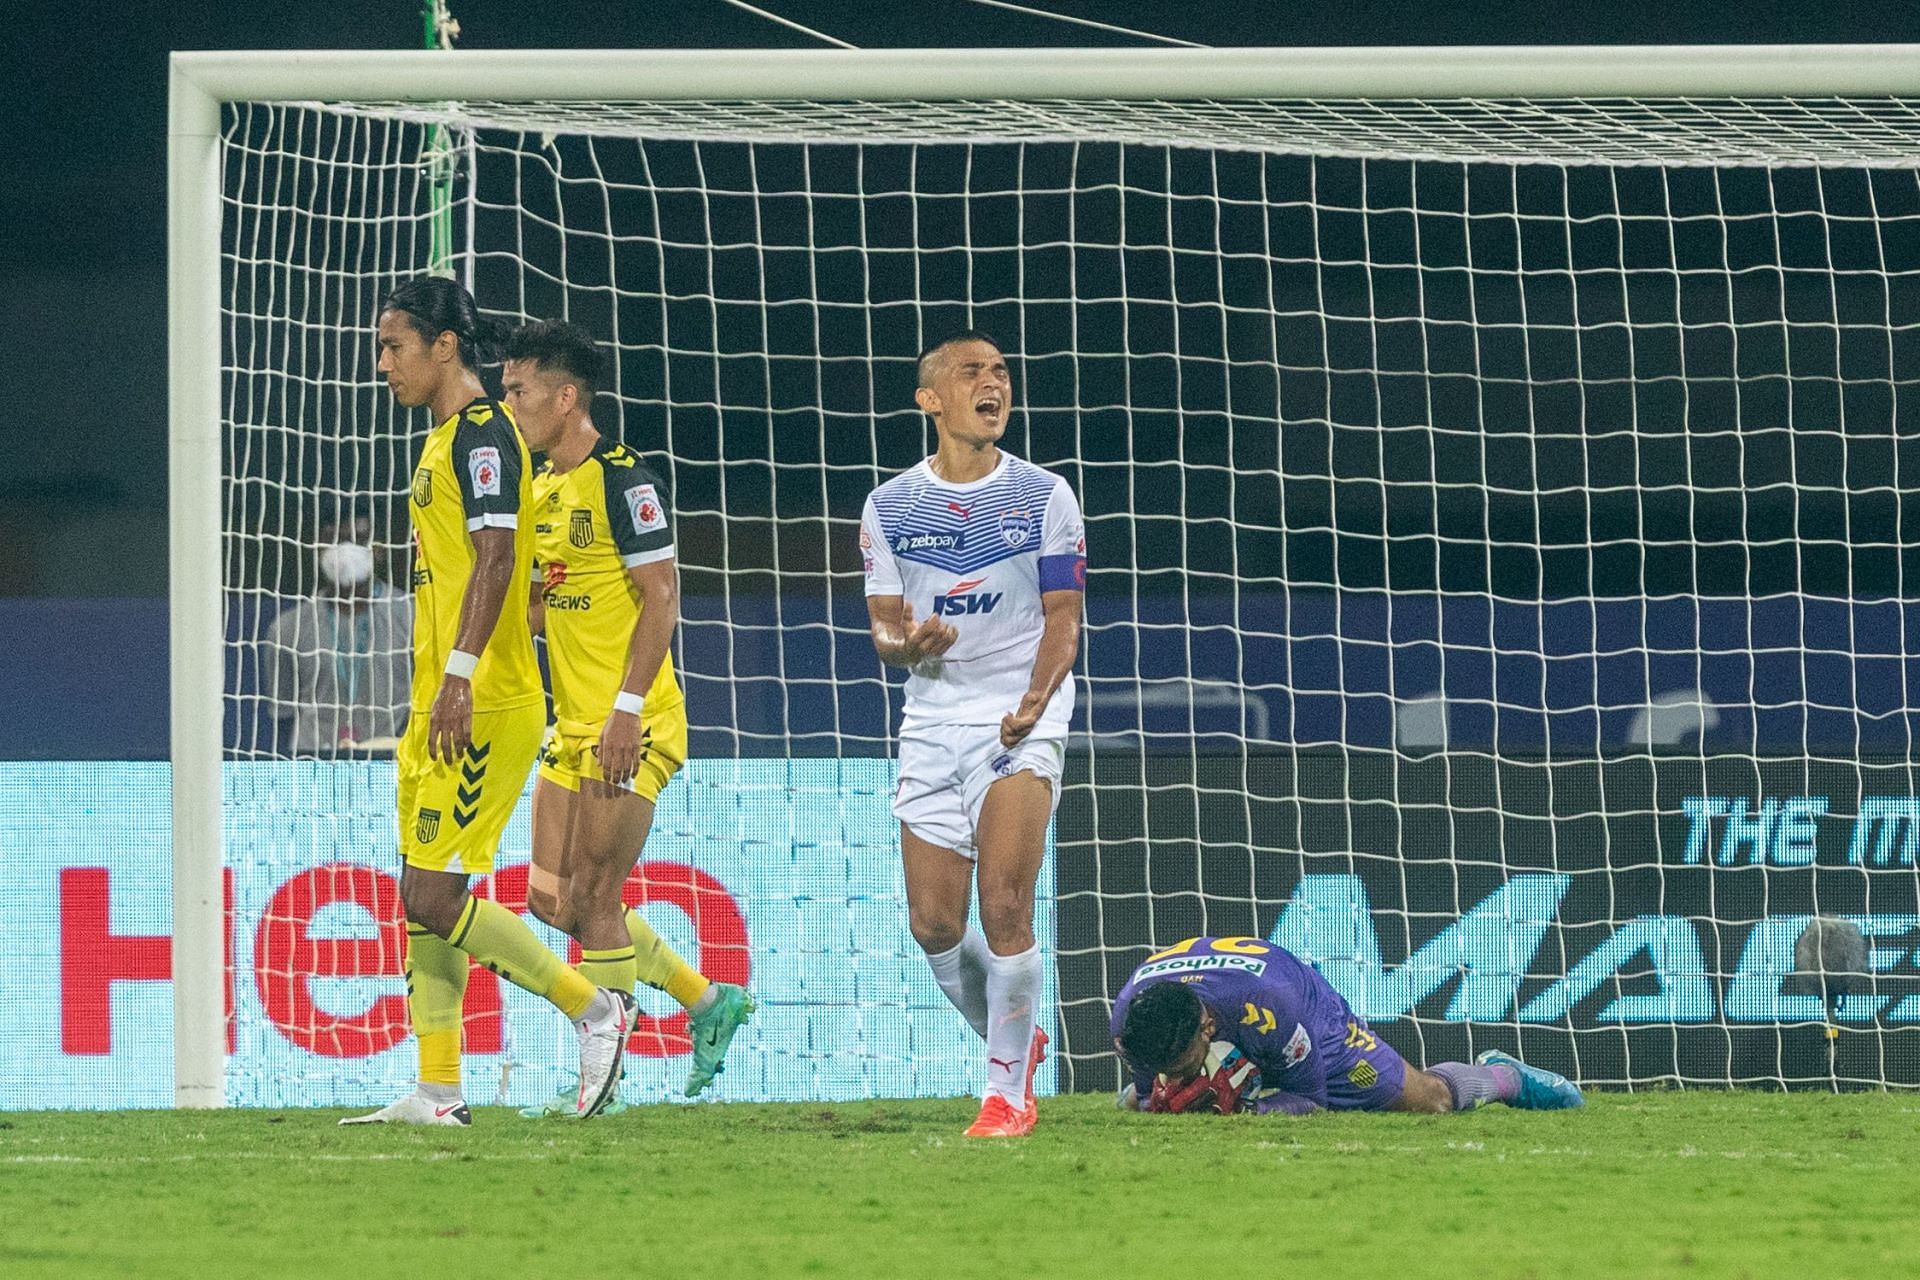 The Nizams emerged victorious against the Blues in the earlier match between the sides this season. (Image Courtesy: ISL).